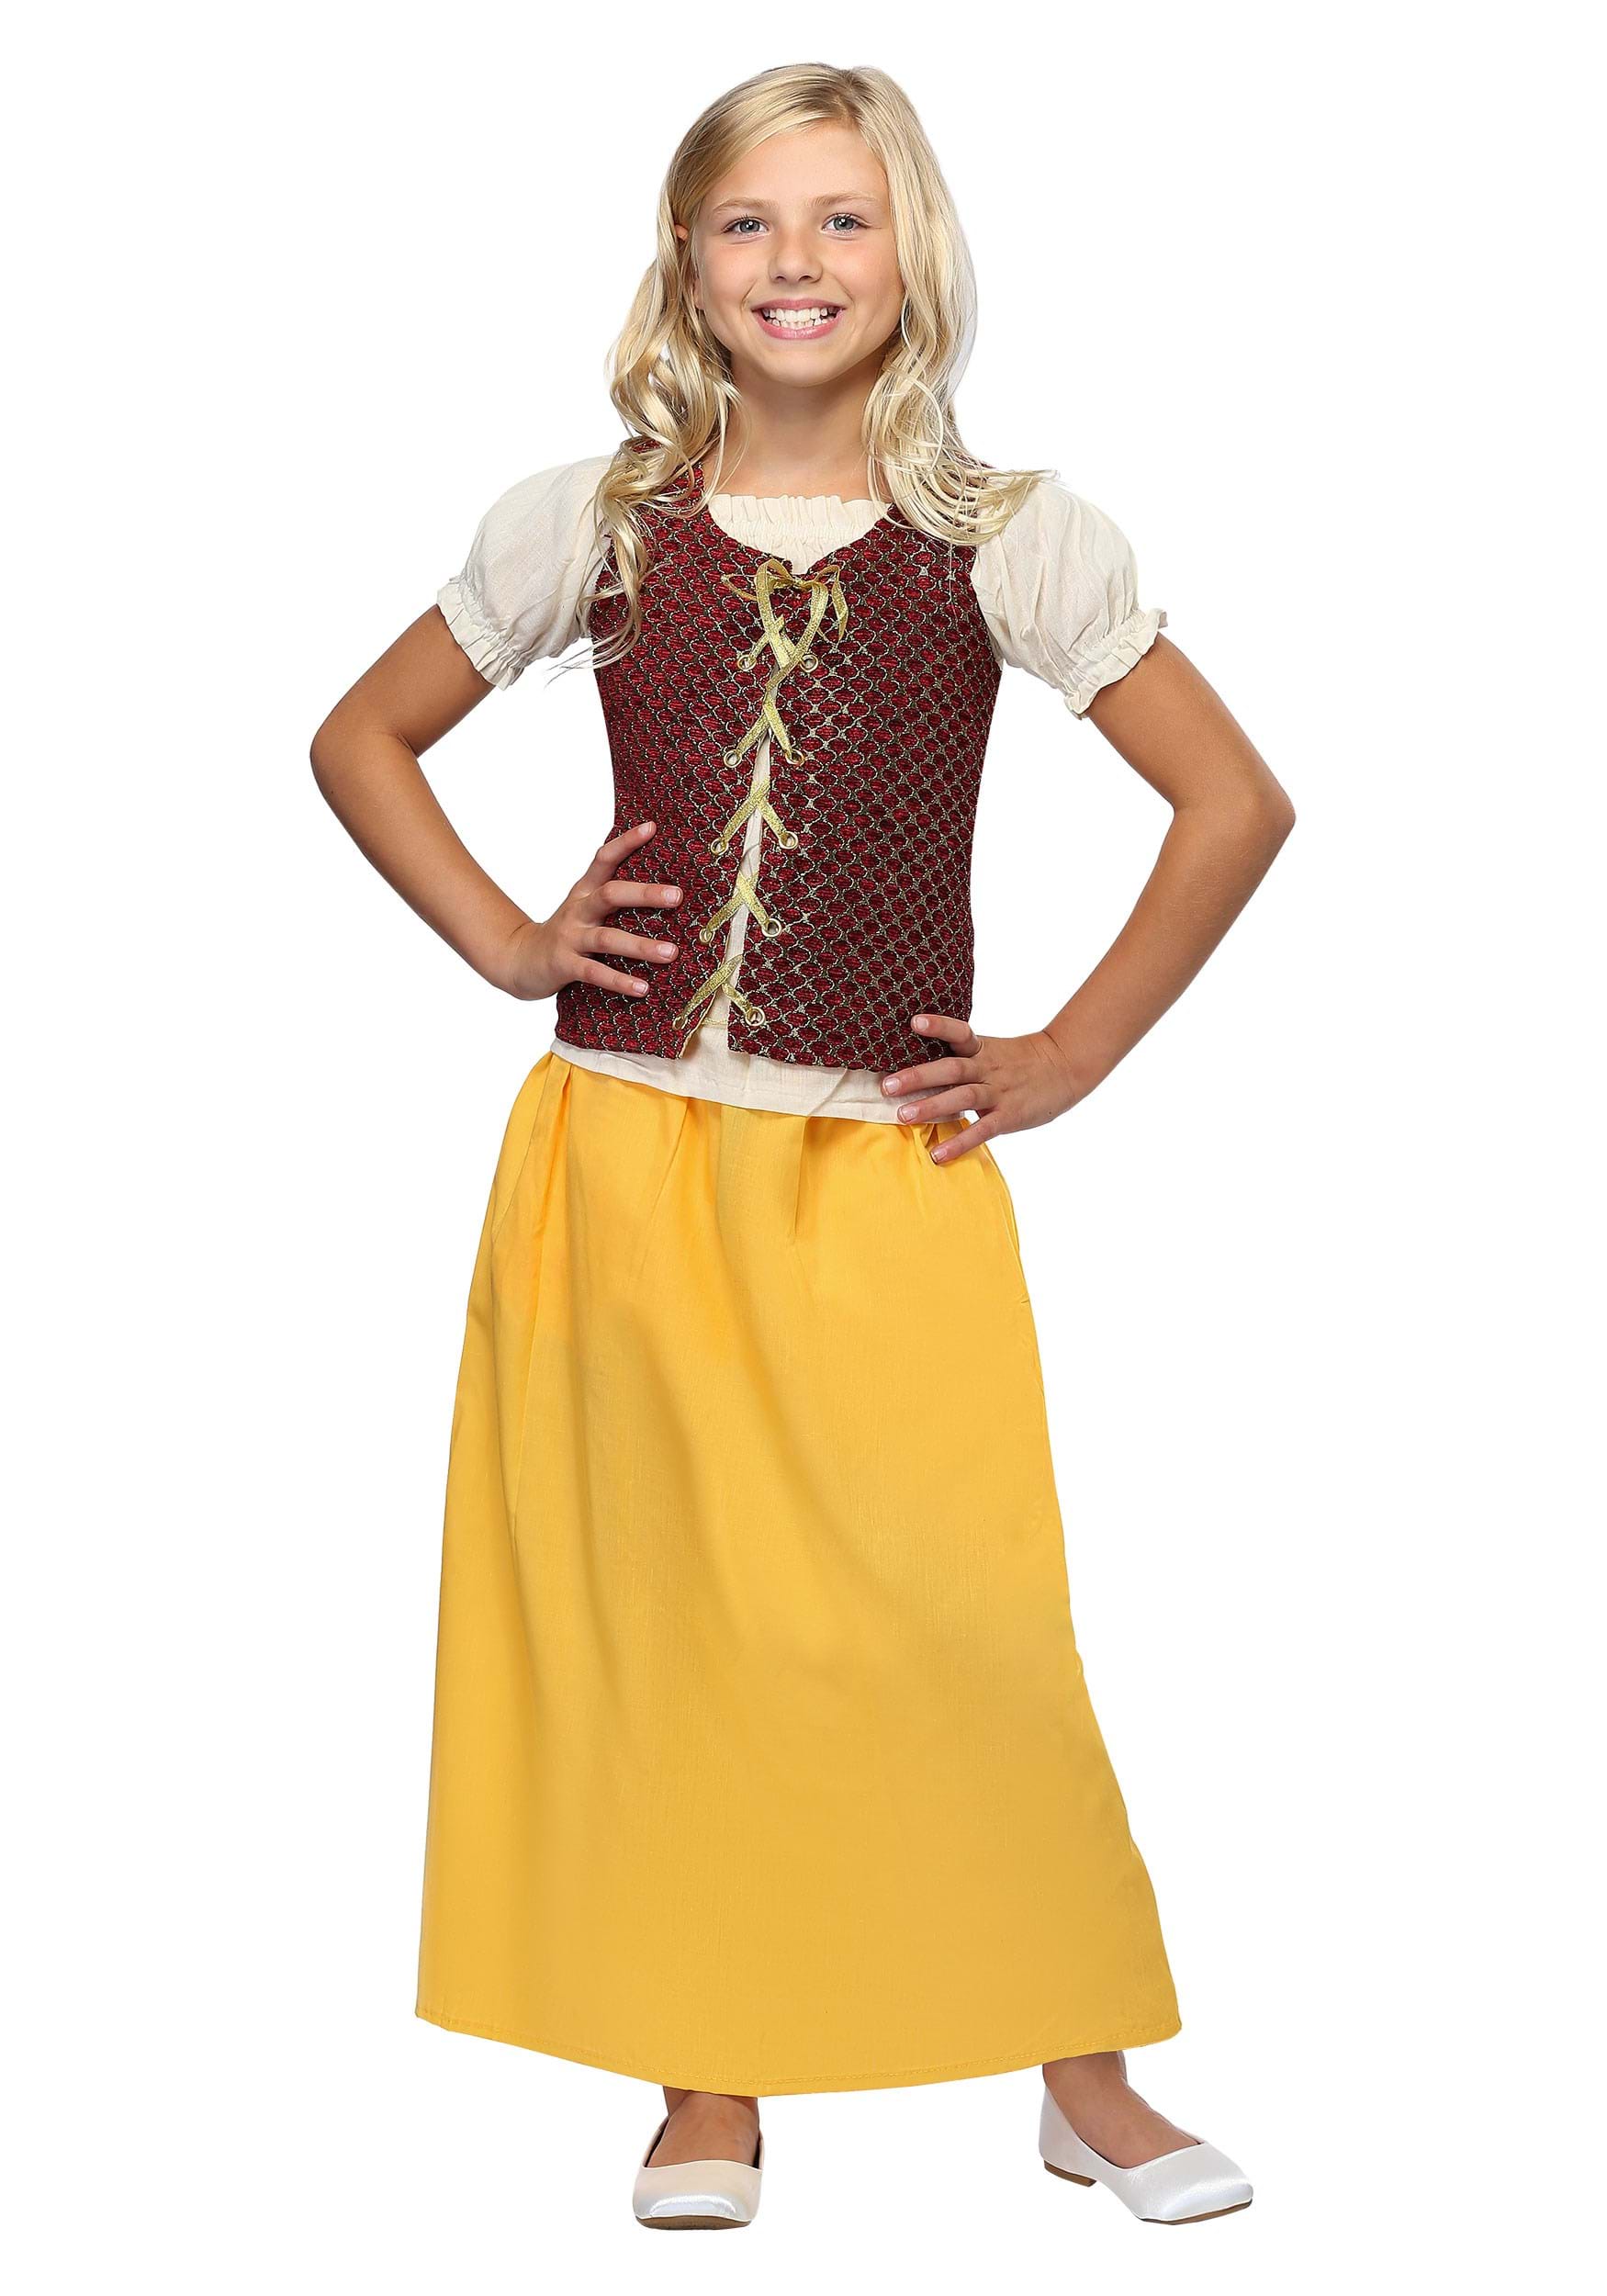 Red Peasant Dress Costume For Kids